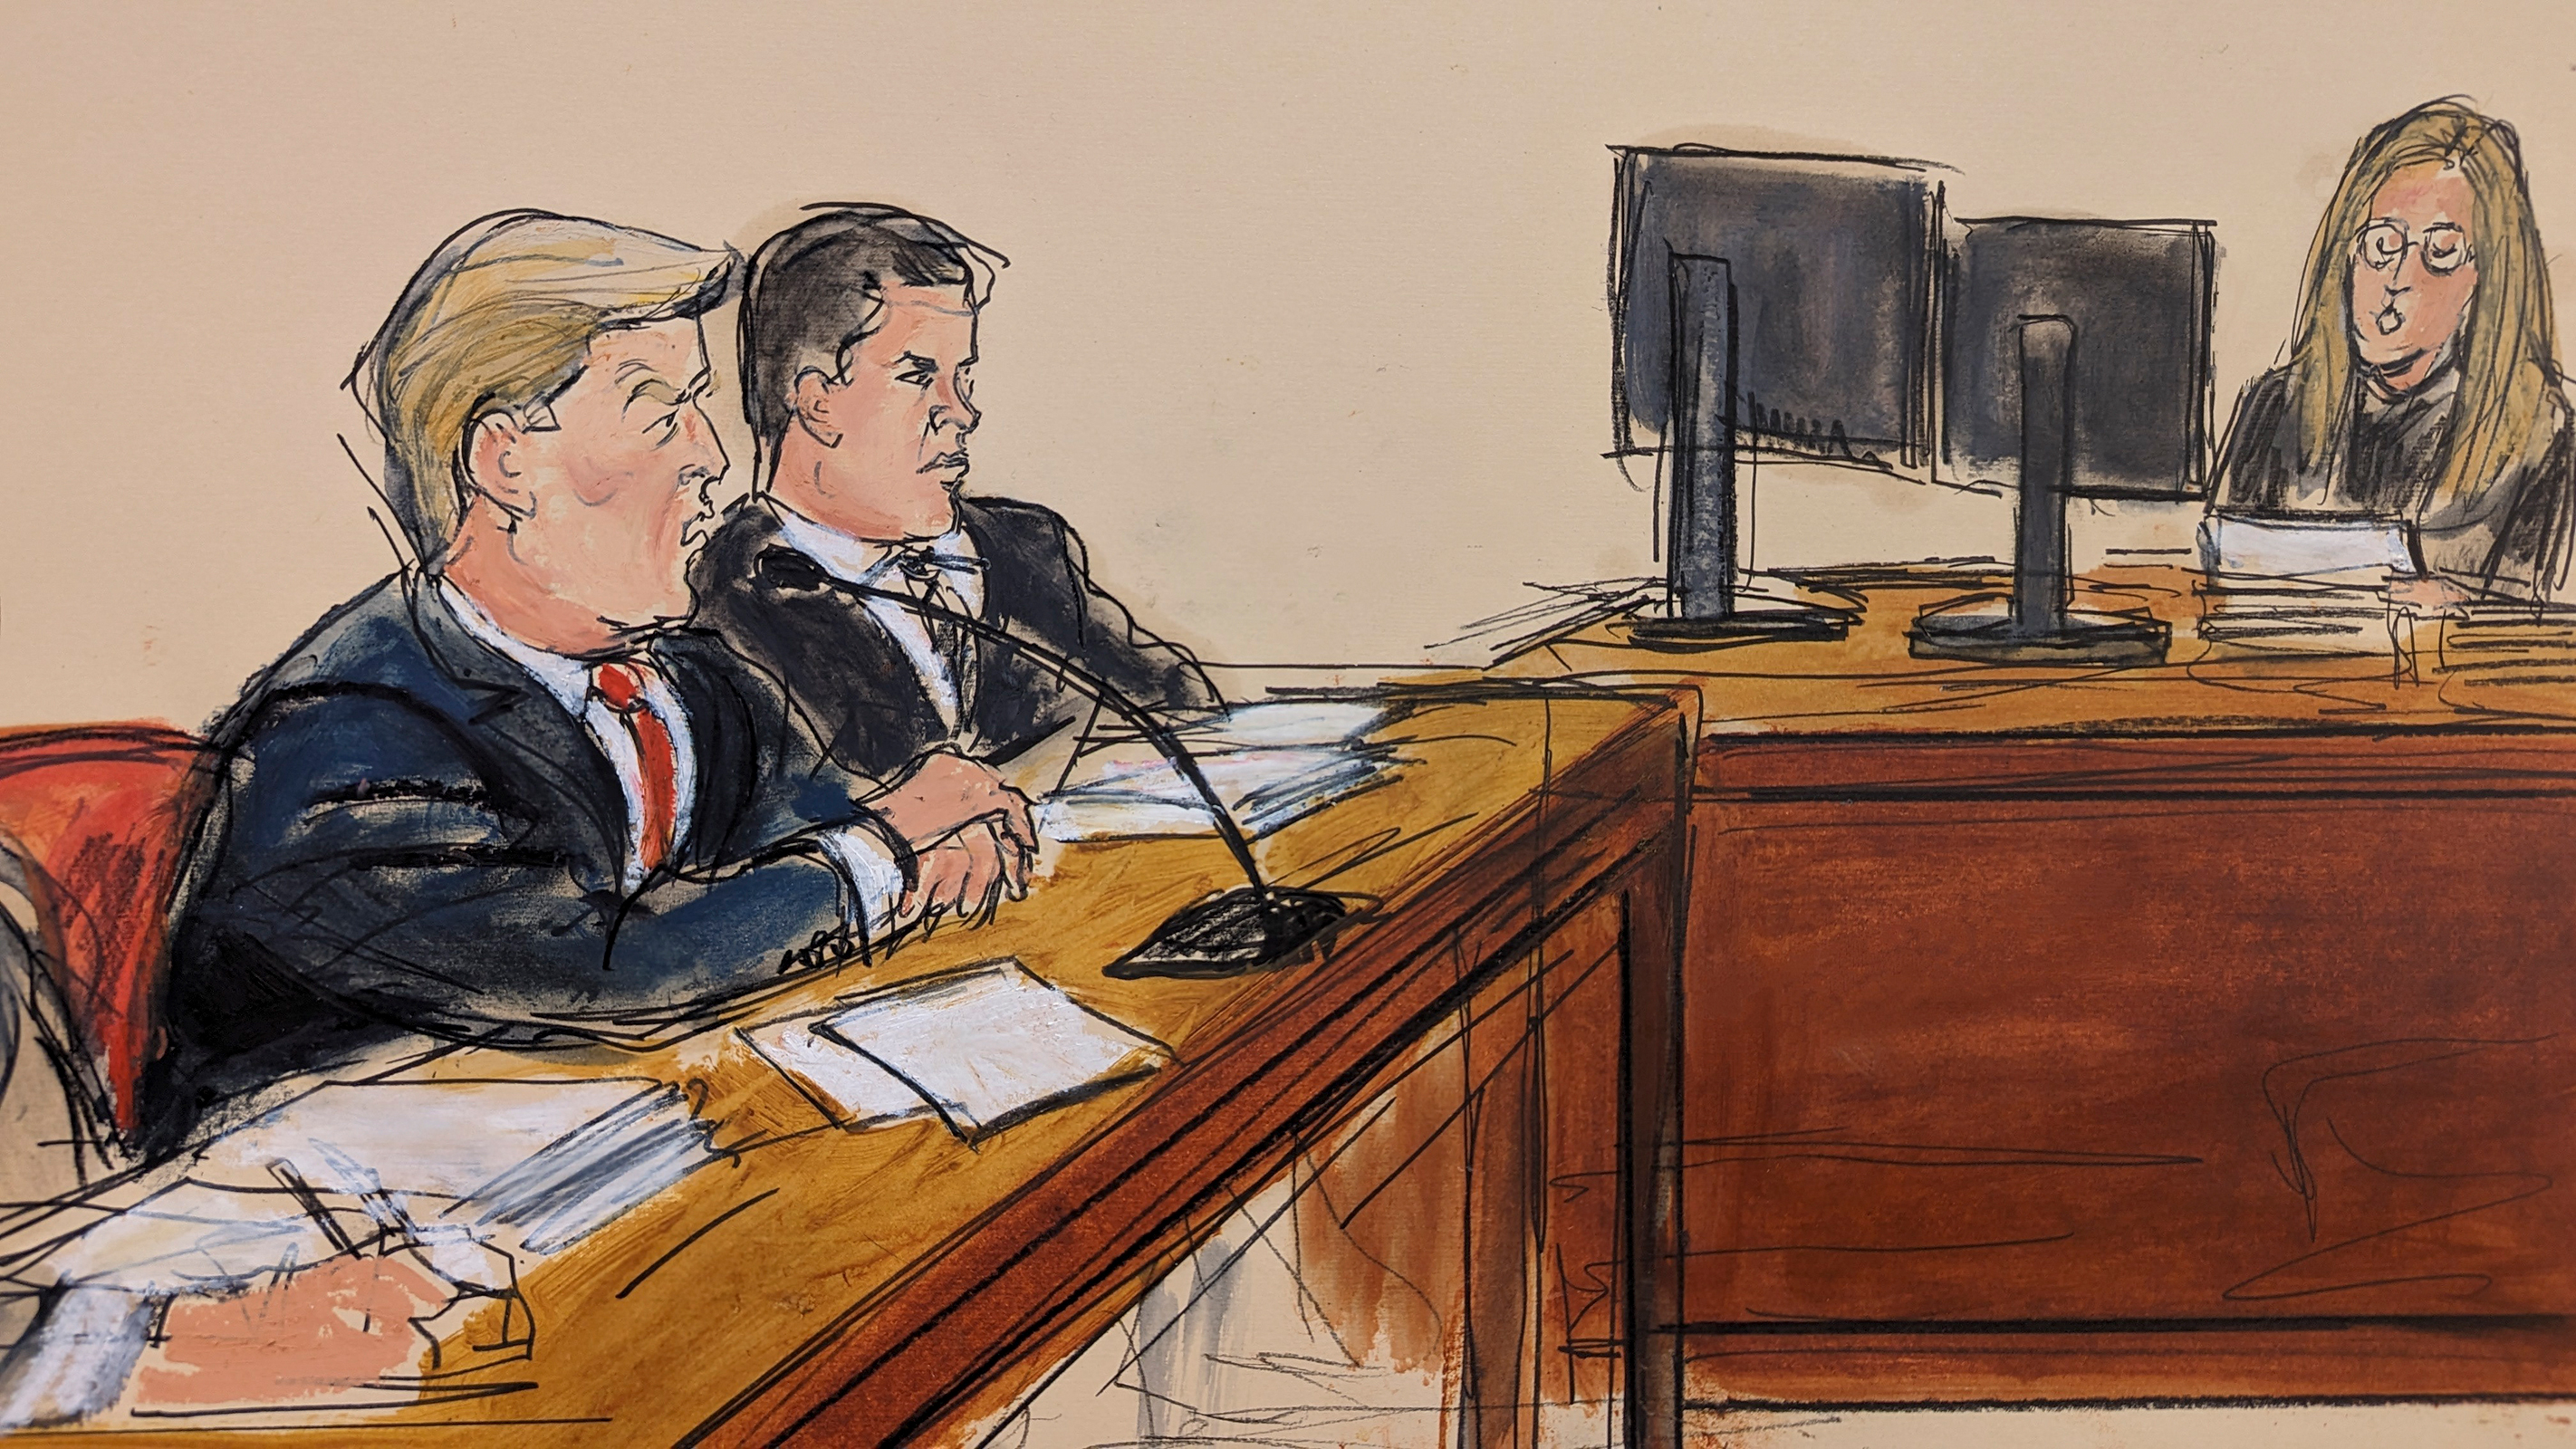 Former President Donald Trump, far left, pleads not guilty as the Clerk of the Court reads the charges and asks him "How do you plea?" Tuesday, April 4, 2023, in a Manhattan courtroom in New York. Defense attorney Joseph Tacopina, center, looked on.